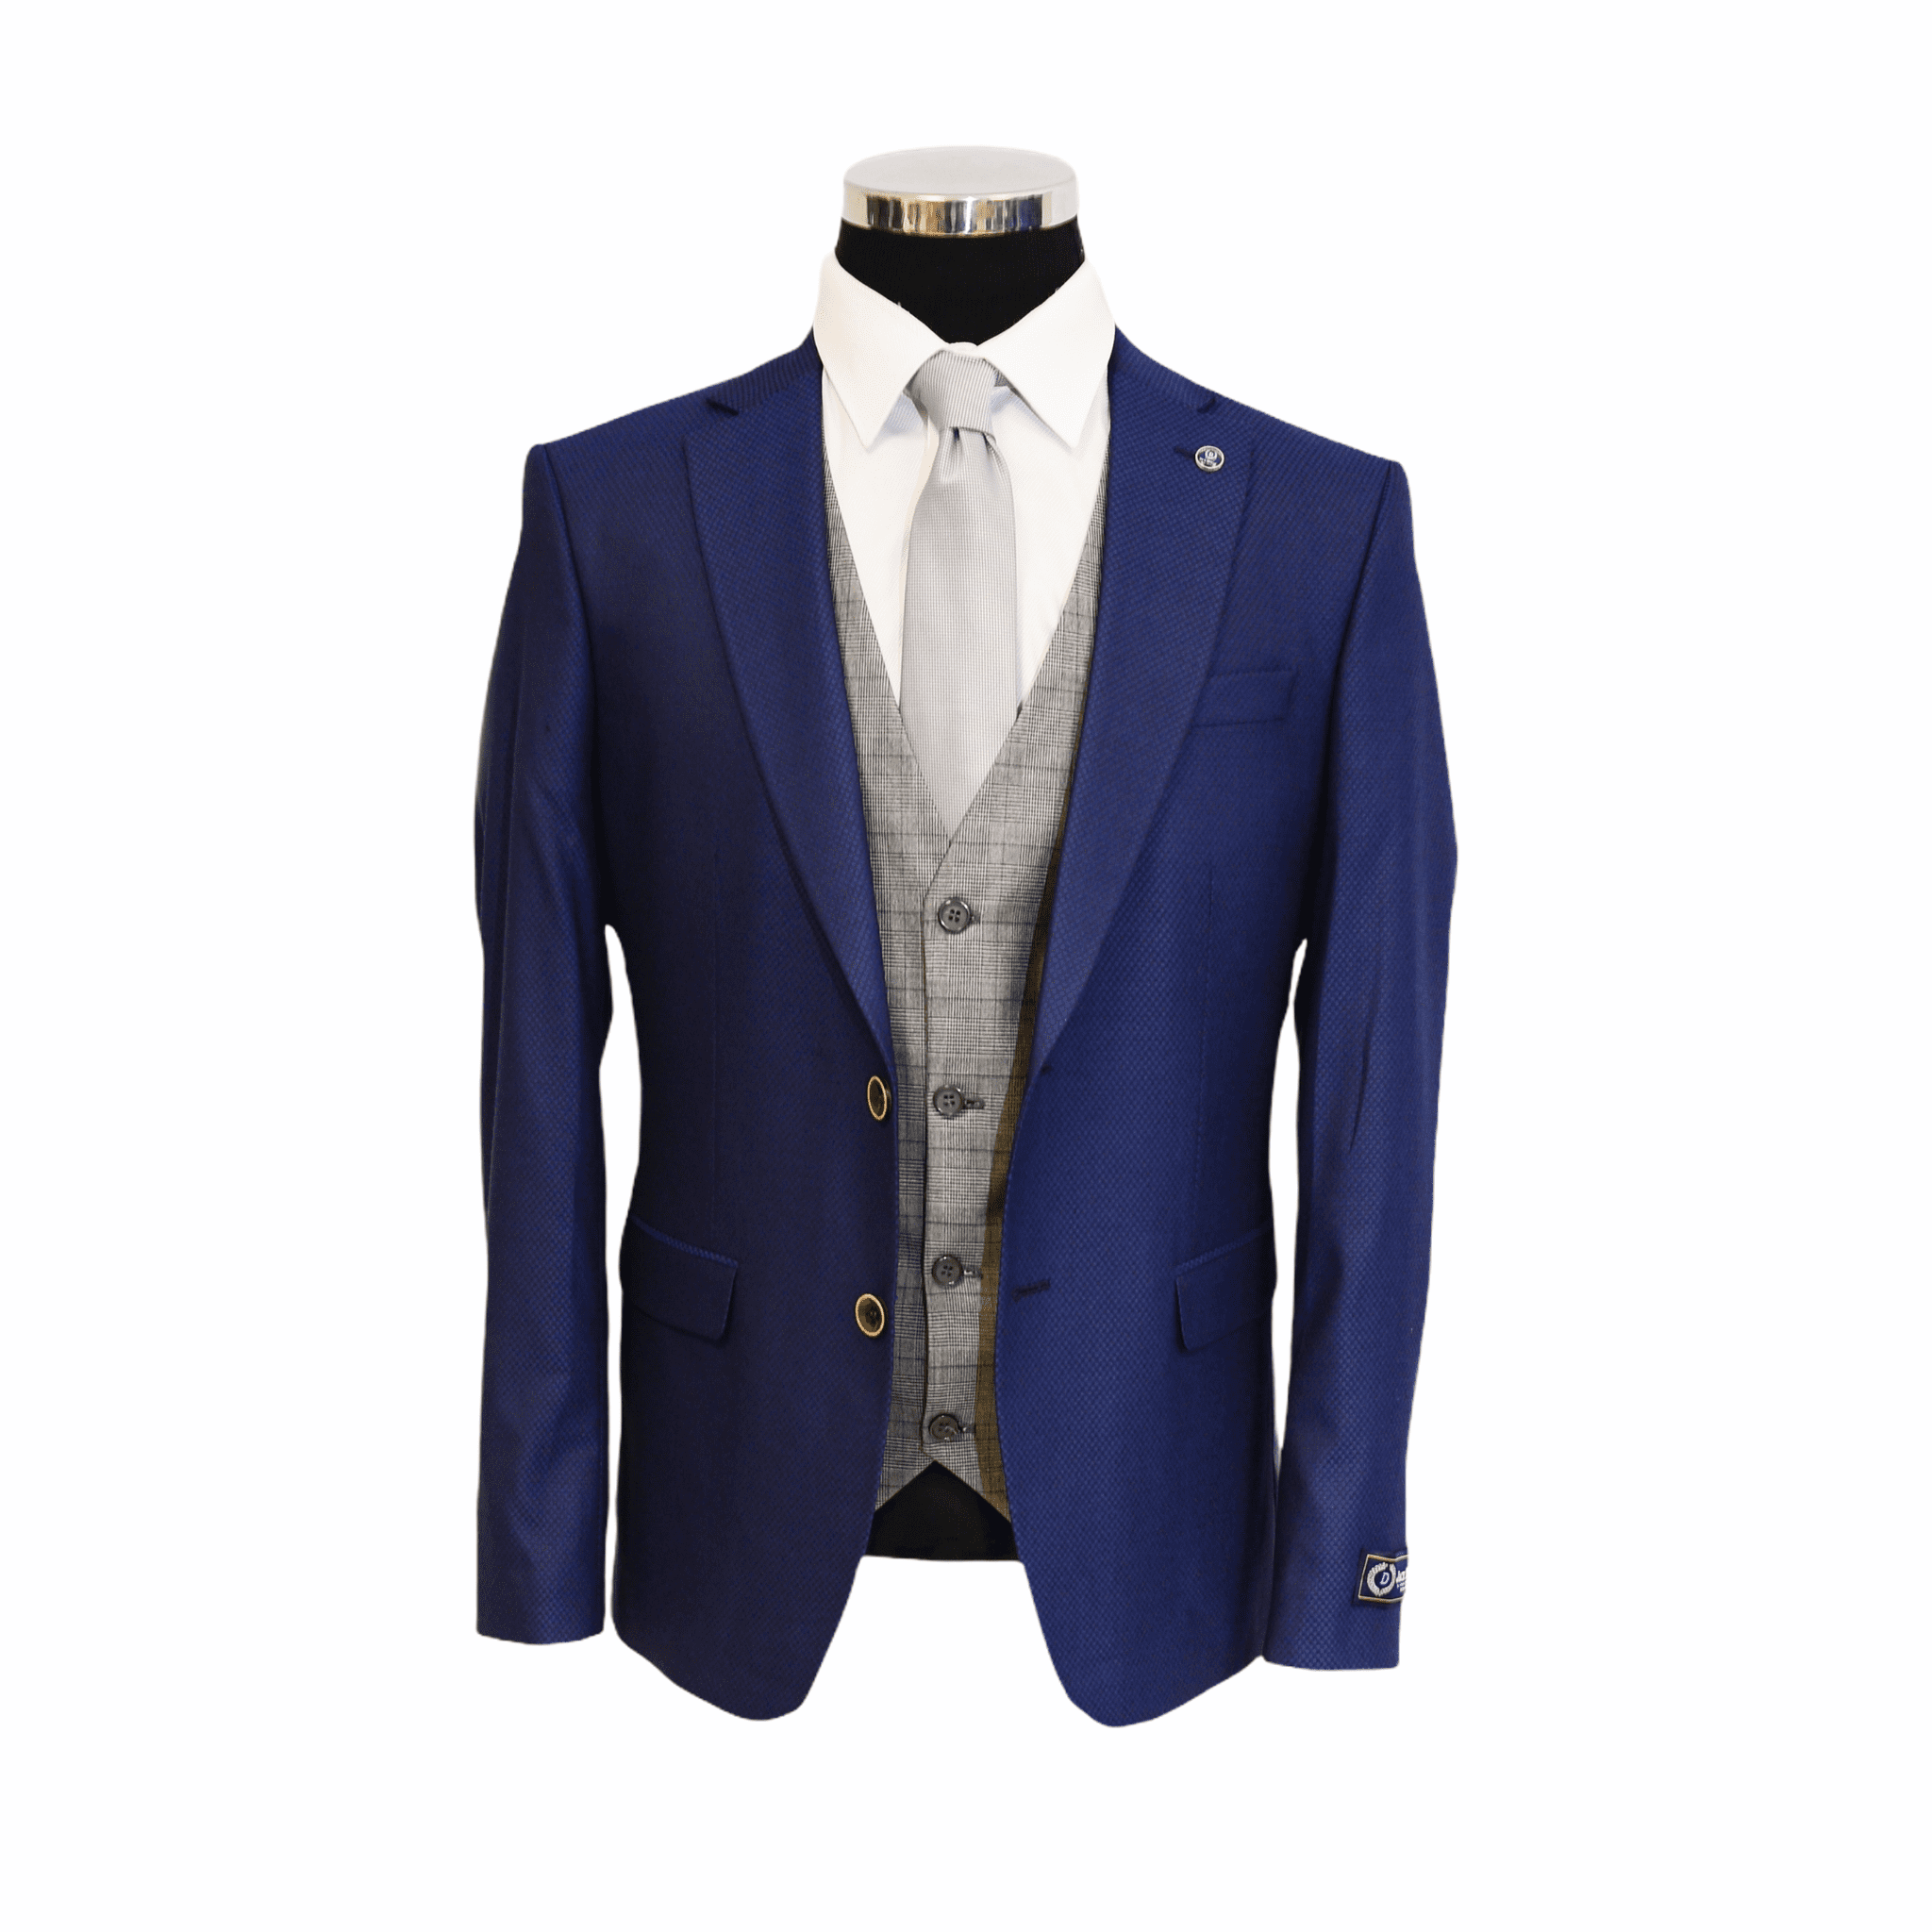 Navy Three Piece Print Suit With Brown Buttons With Contrasting Light Grey Check Waistcoat